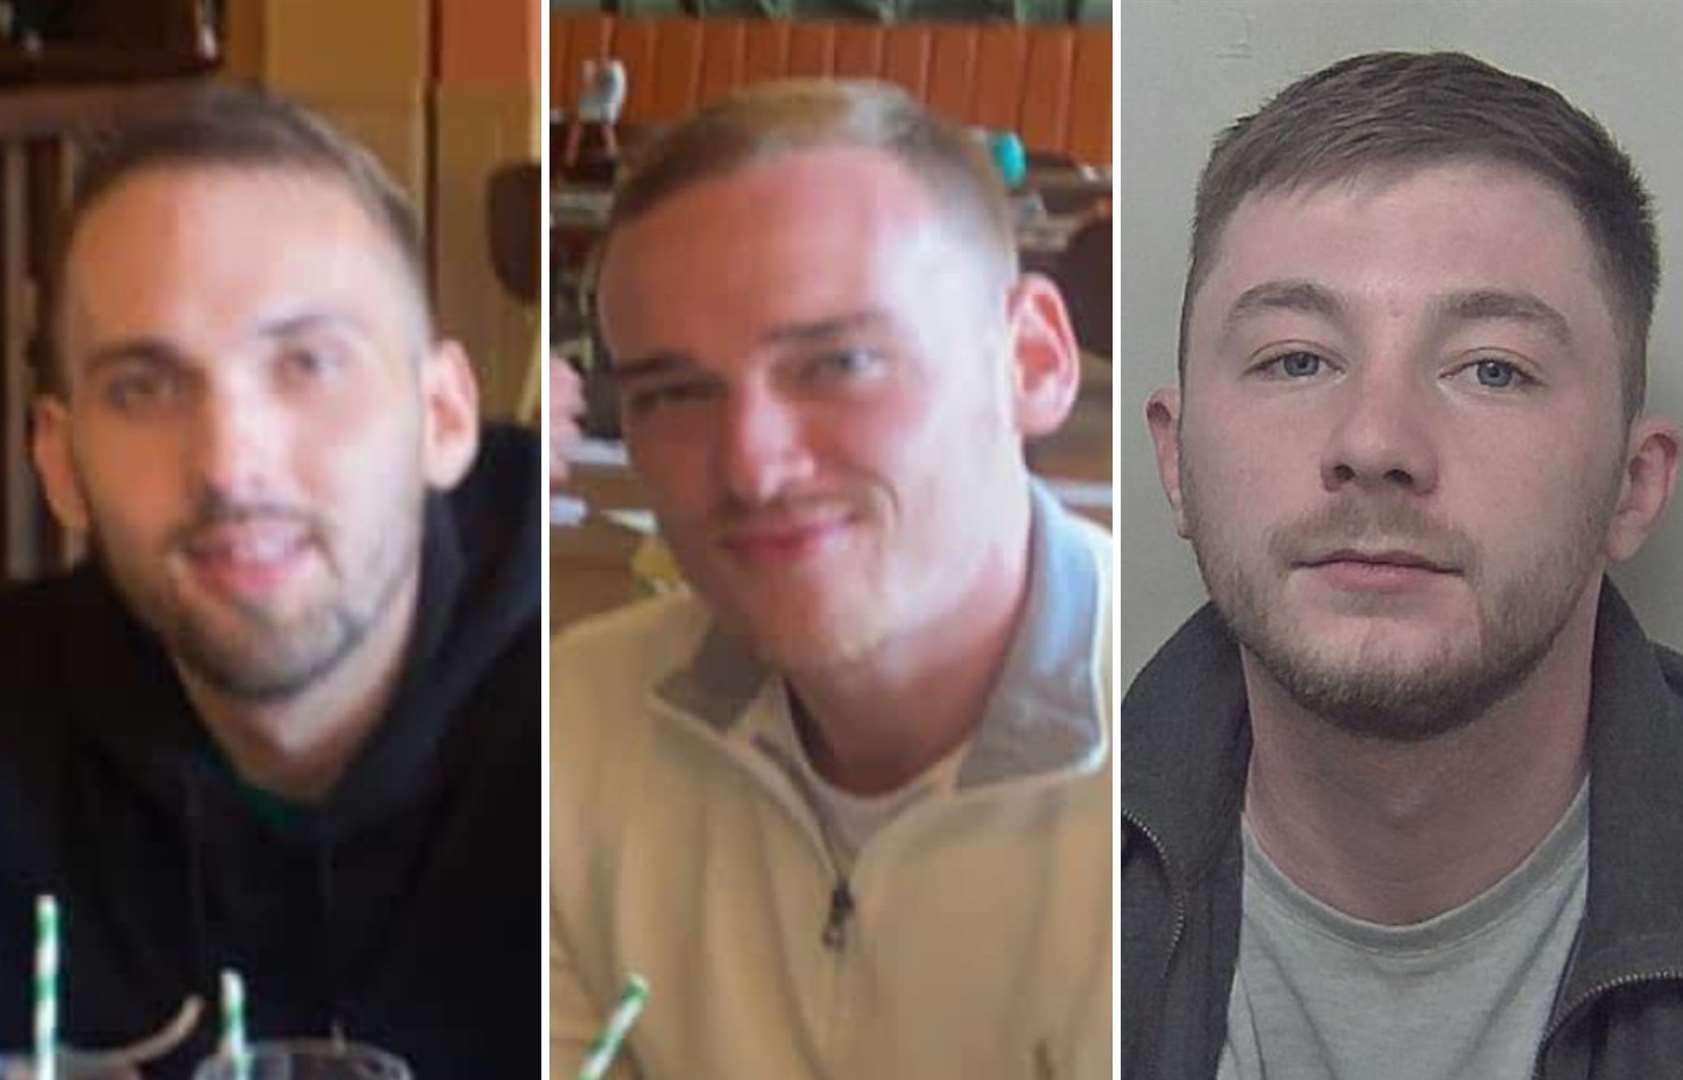 George Cooper, Simon Brockhouse and Taylor Porter were sentenced following the brawl at Lesters in Margate